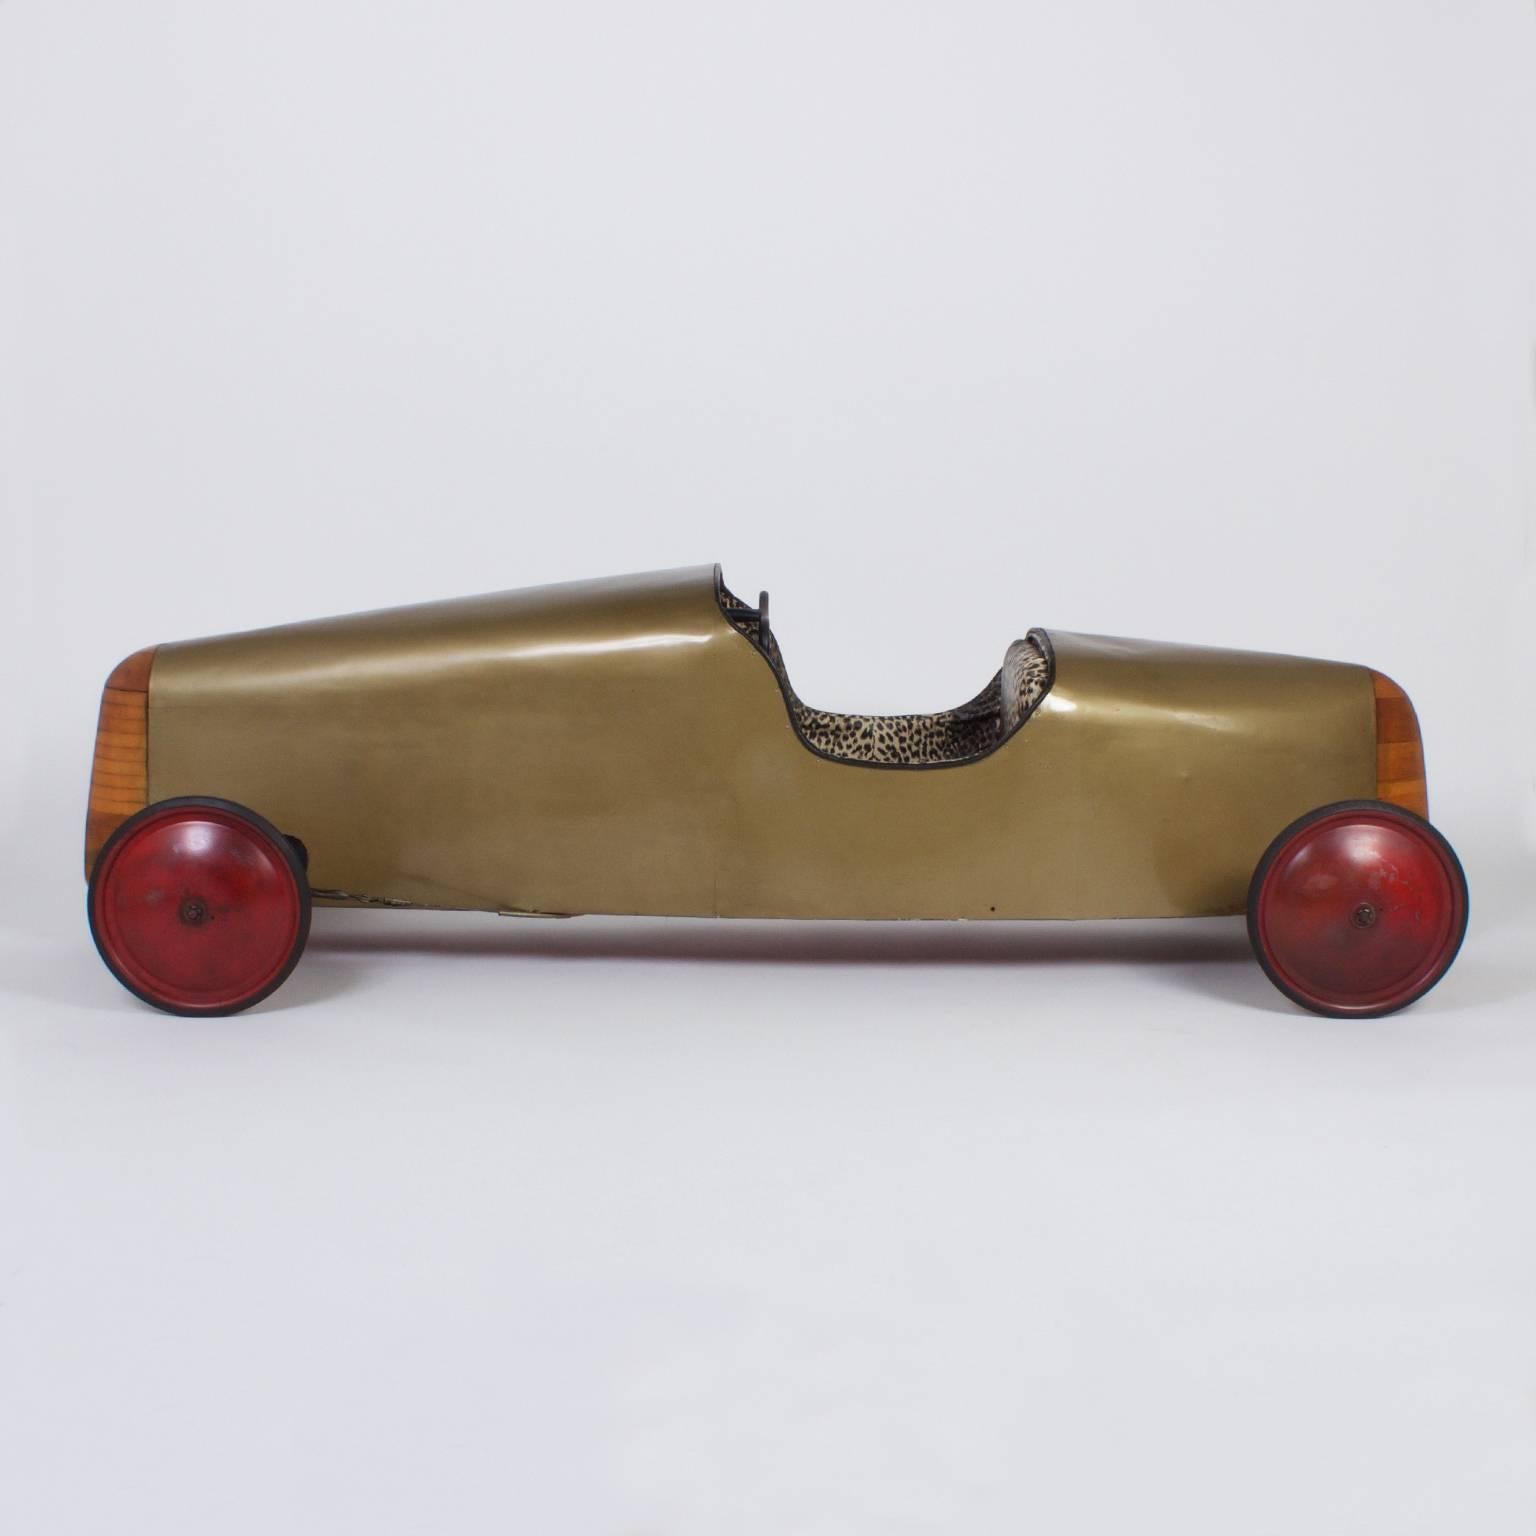 Here is a rare piece of Americana, a Mid-Century soap box derby racing car with sophisticated craftsmanship and classic form. The sleek body is gold lacquer. The interior is an unexpected leopard print vinyl. The front, rear and axel support